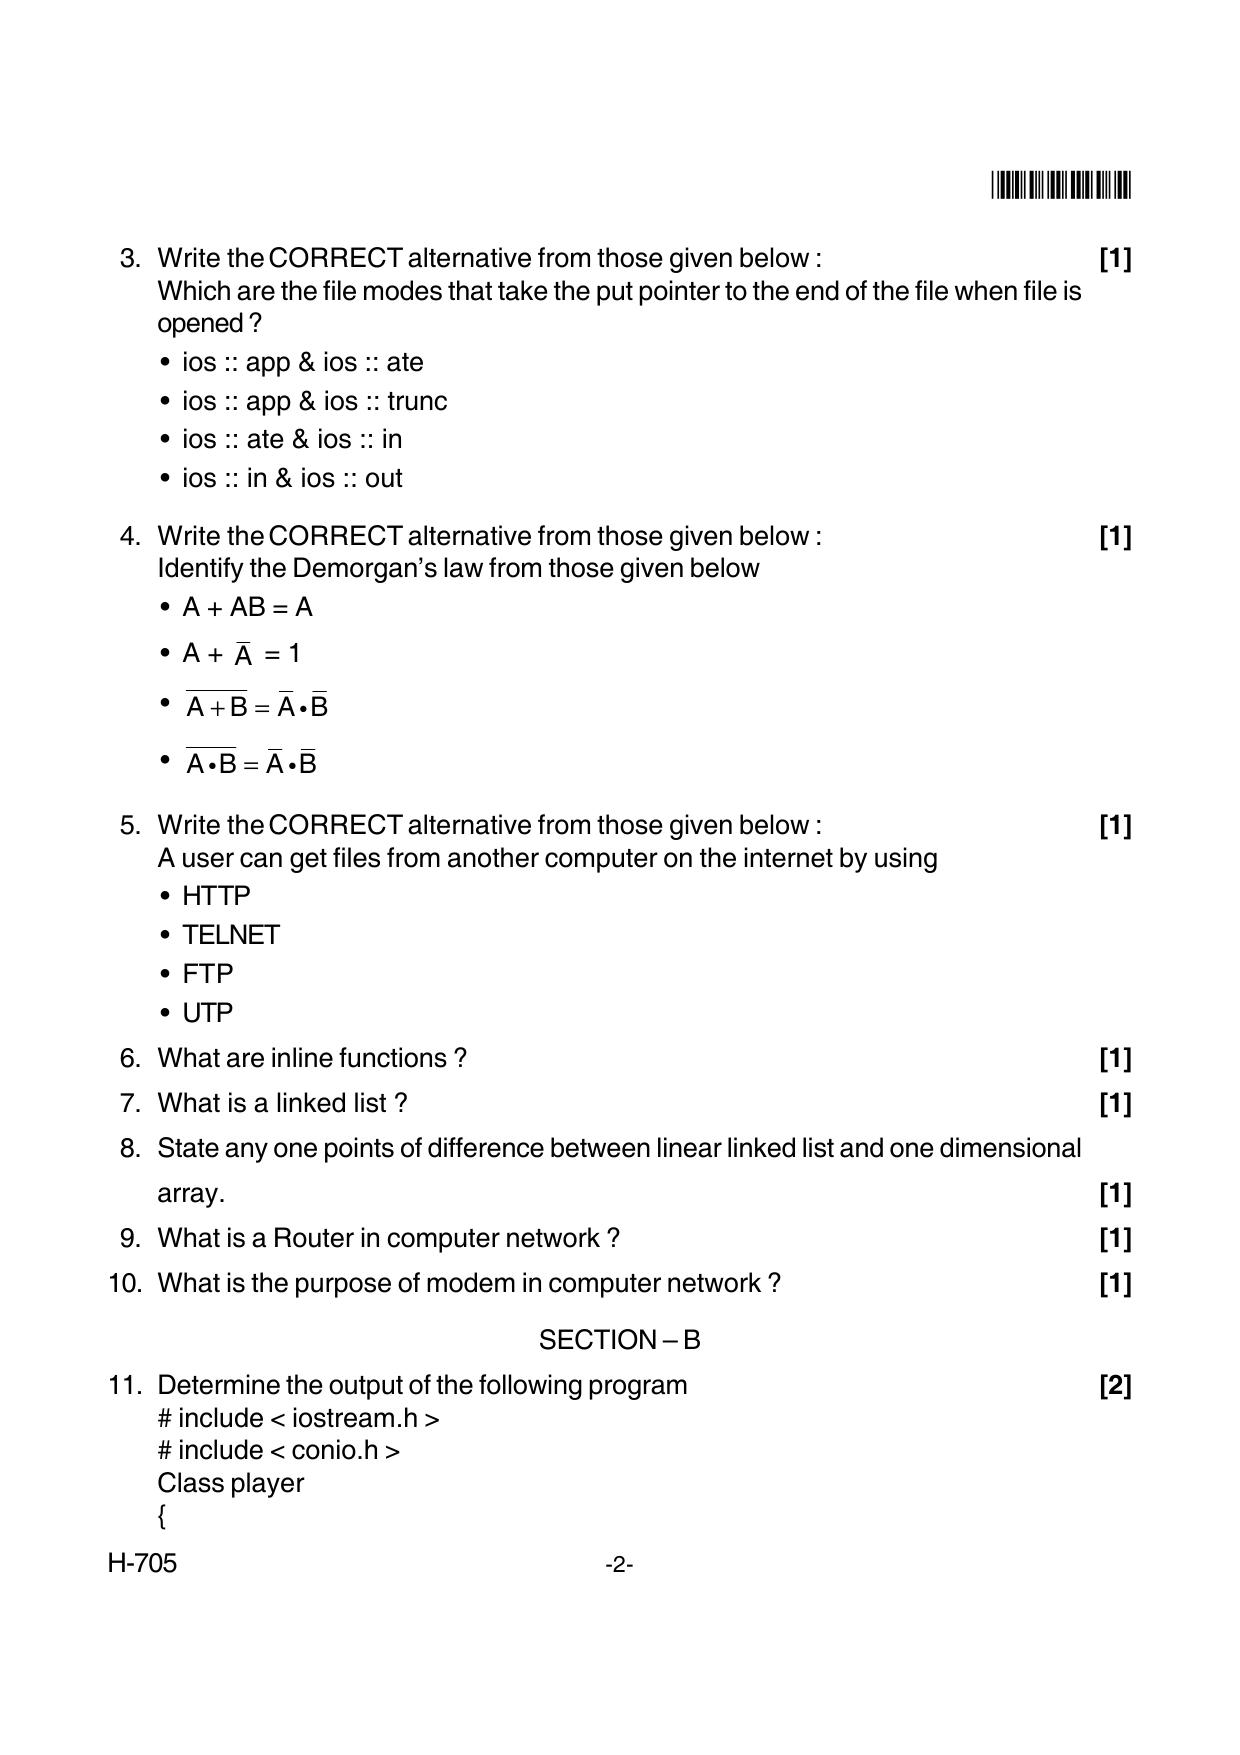 Goa Board Class 12 Computer Science  705 New Pattern Paper 2 (June 2018) Question Paper - Page 2